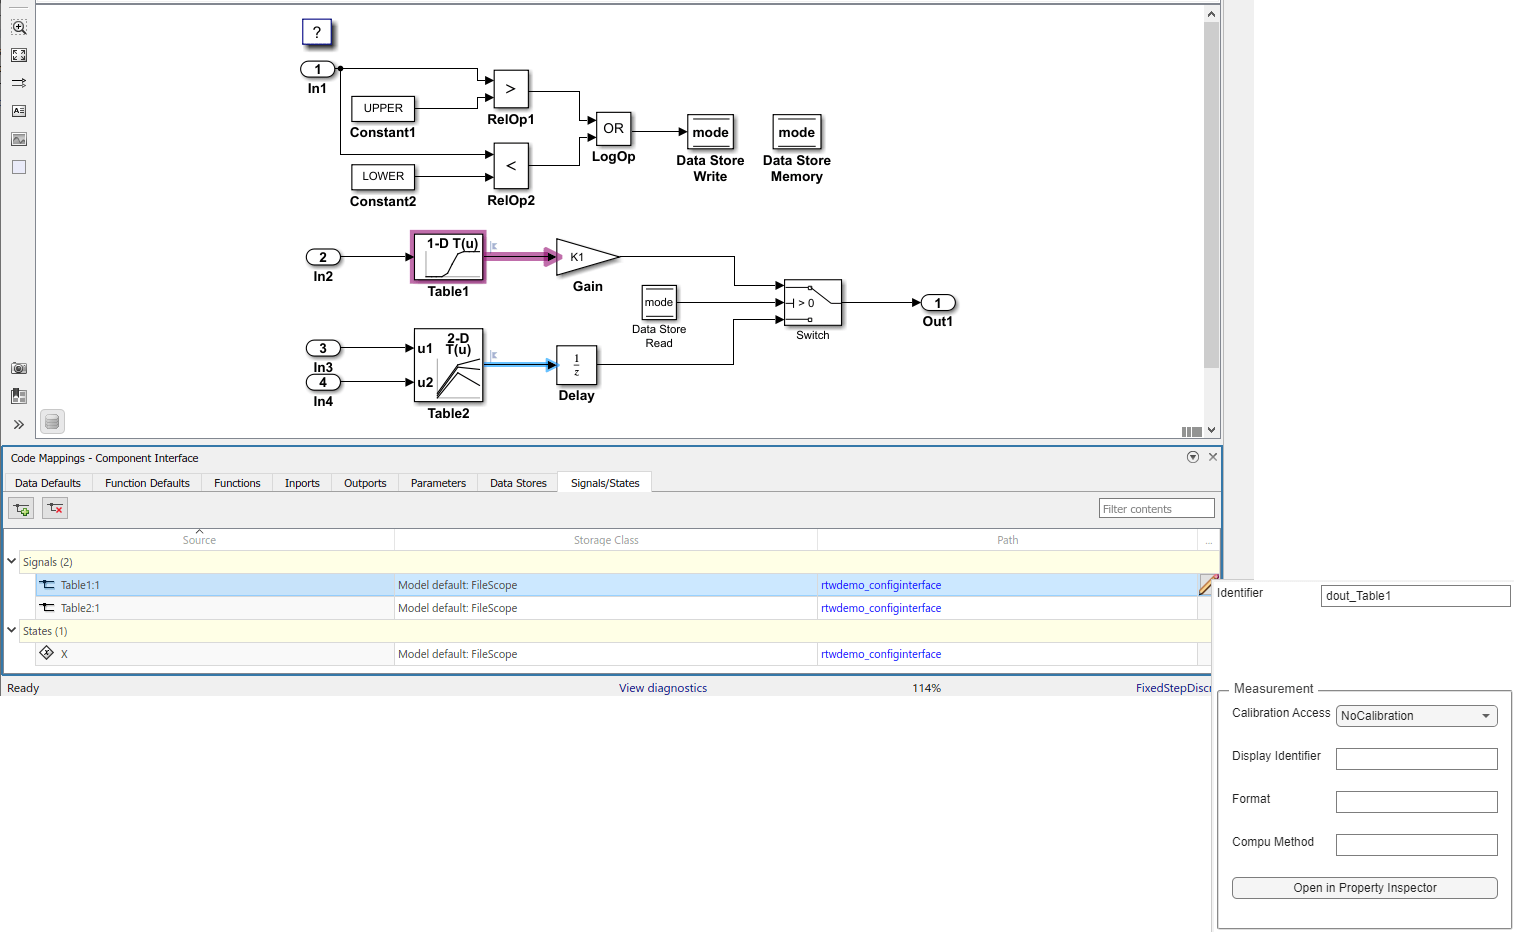 Code Mappings editor with Signals/States tab selected, Signals tree node expanded, and storage class for signals Table1:1 and Table2:1 set to Model default: FileScope. Mapping Inspector shows Identifer property for signal Table1:1 set to dout_Table1.